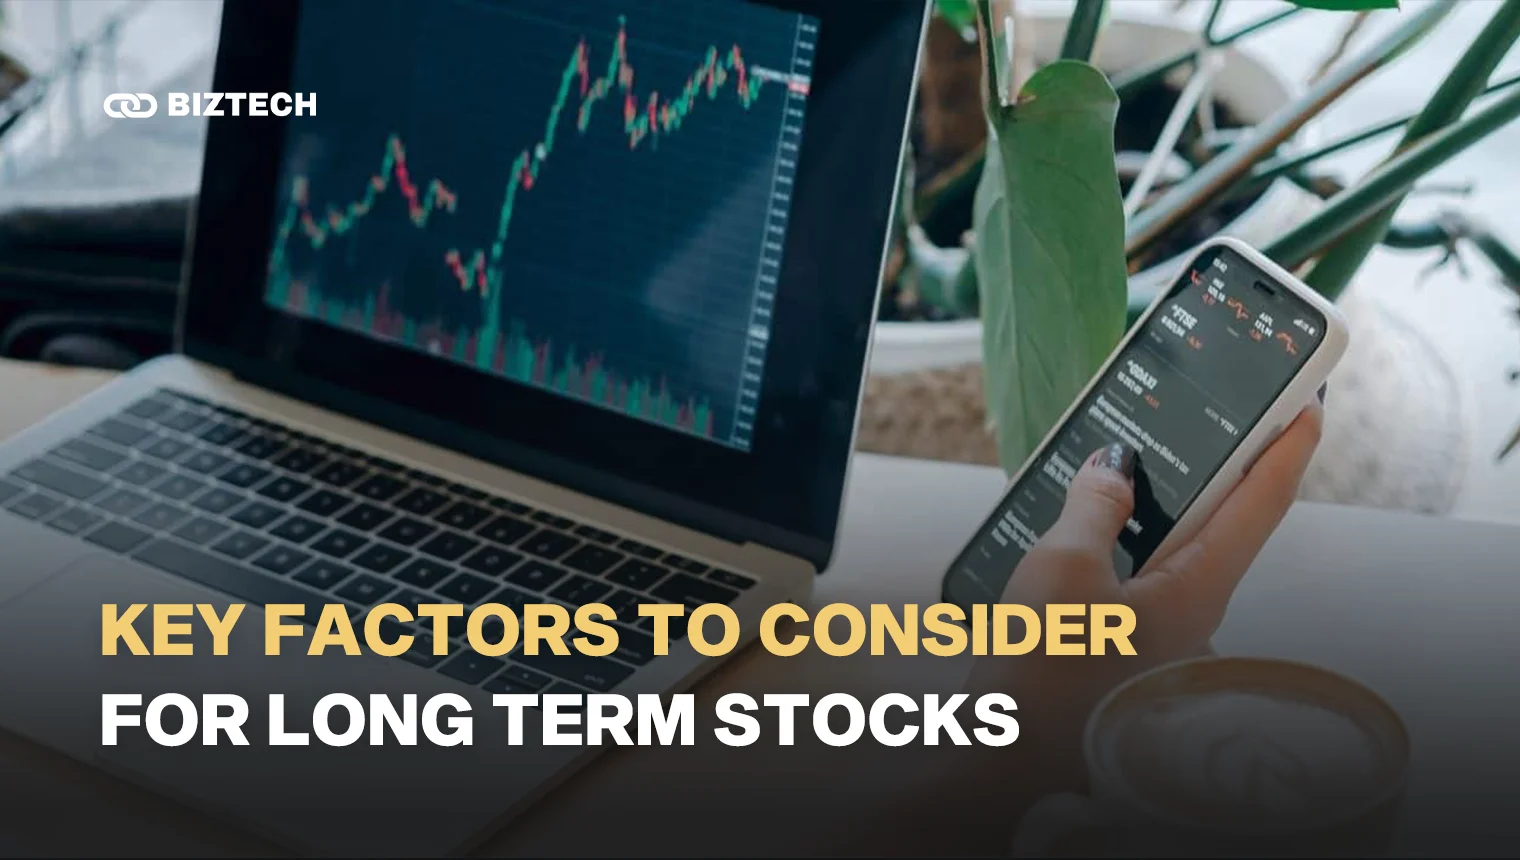 Key Factors to Consider for Long-Term Stocks